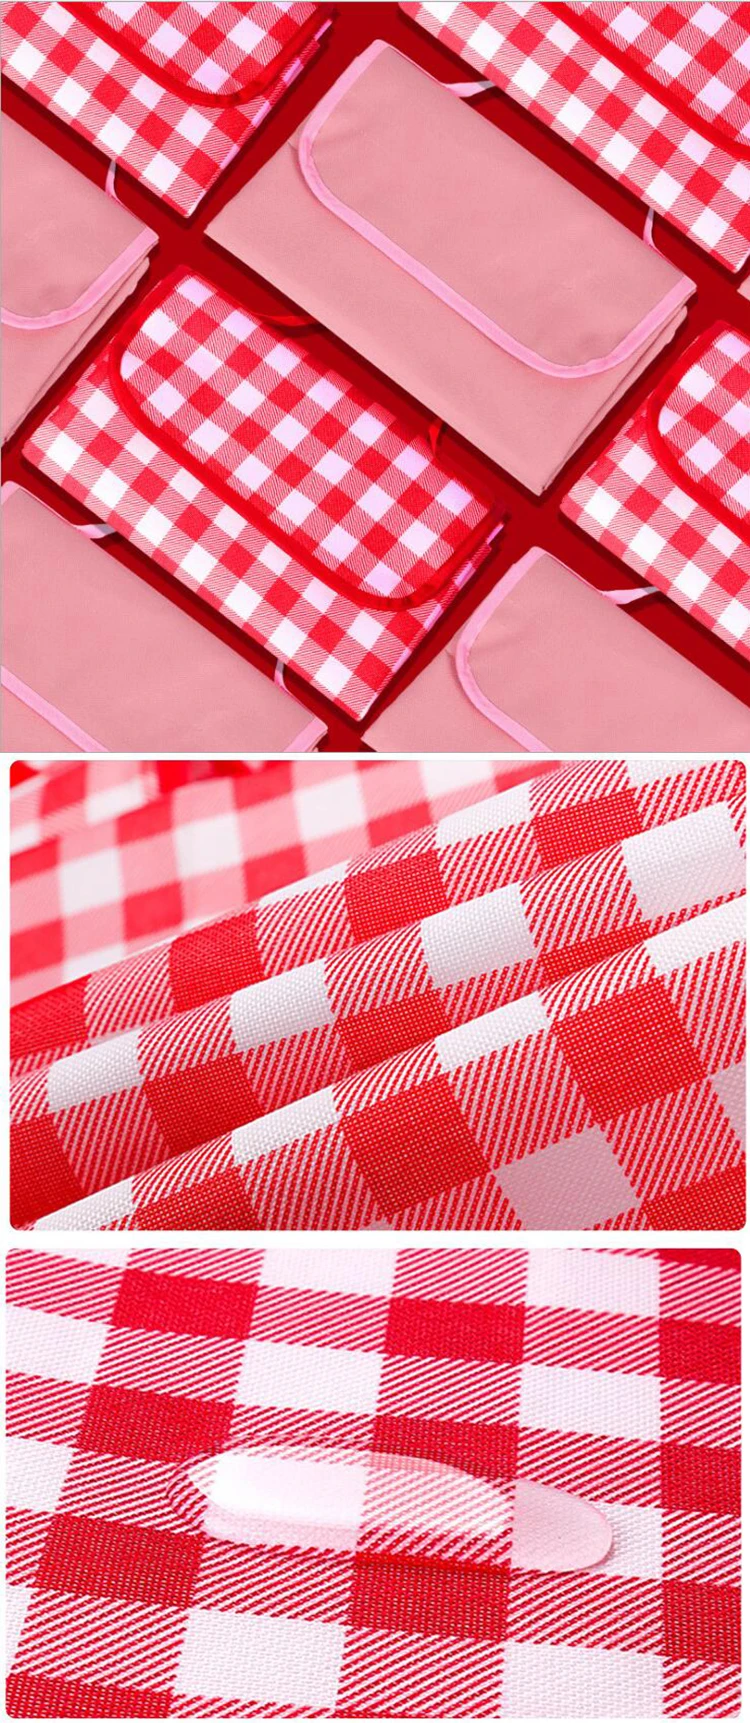 200x200mm Foldable sand proof camping waterproof blanket picnic Outdoor Travel beach blanket mat